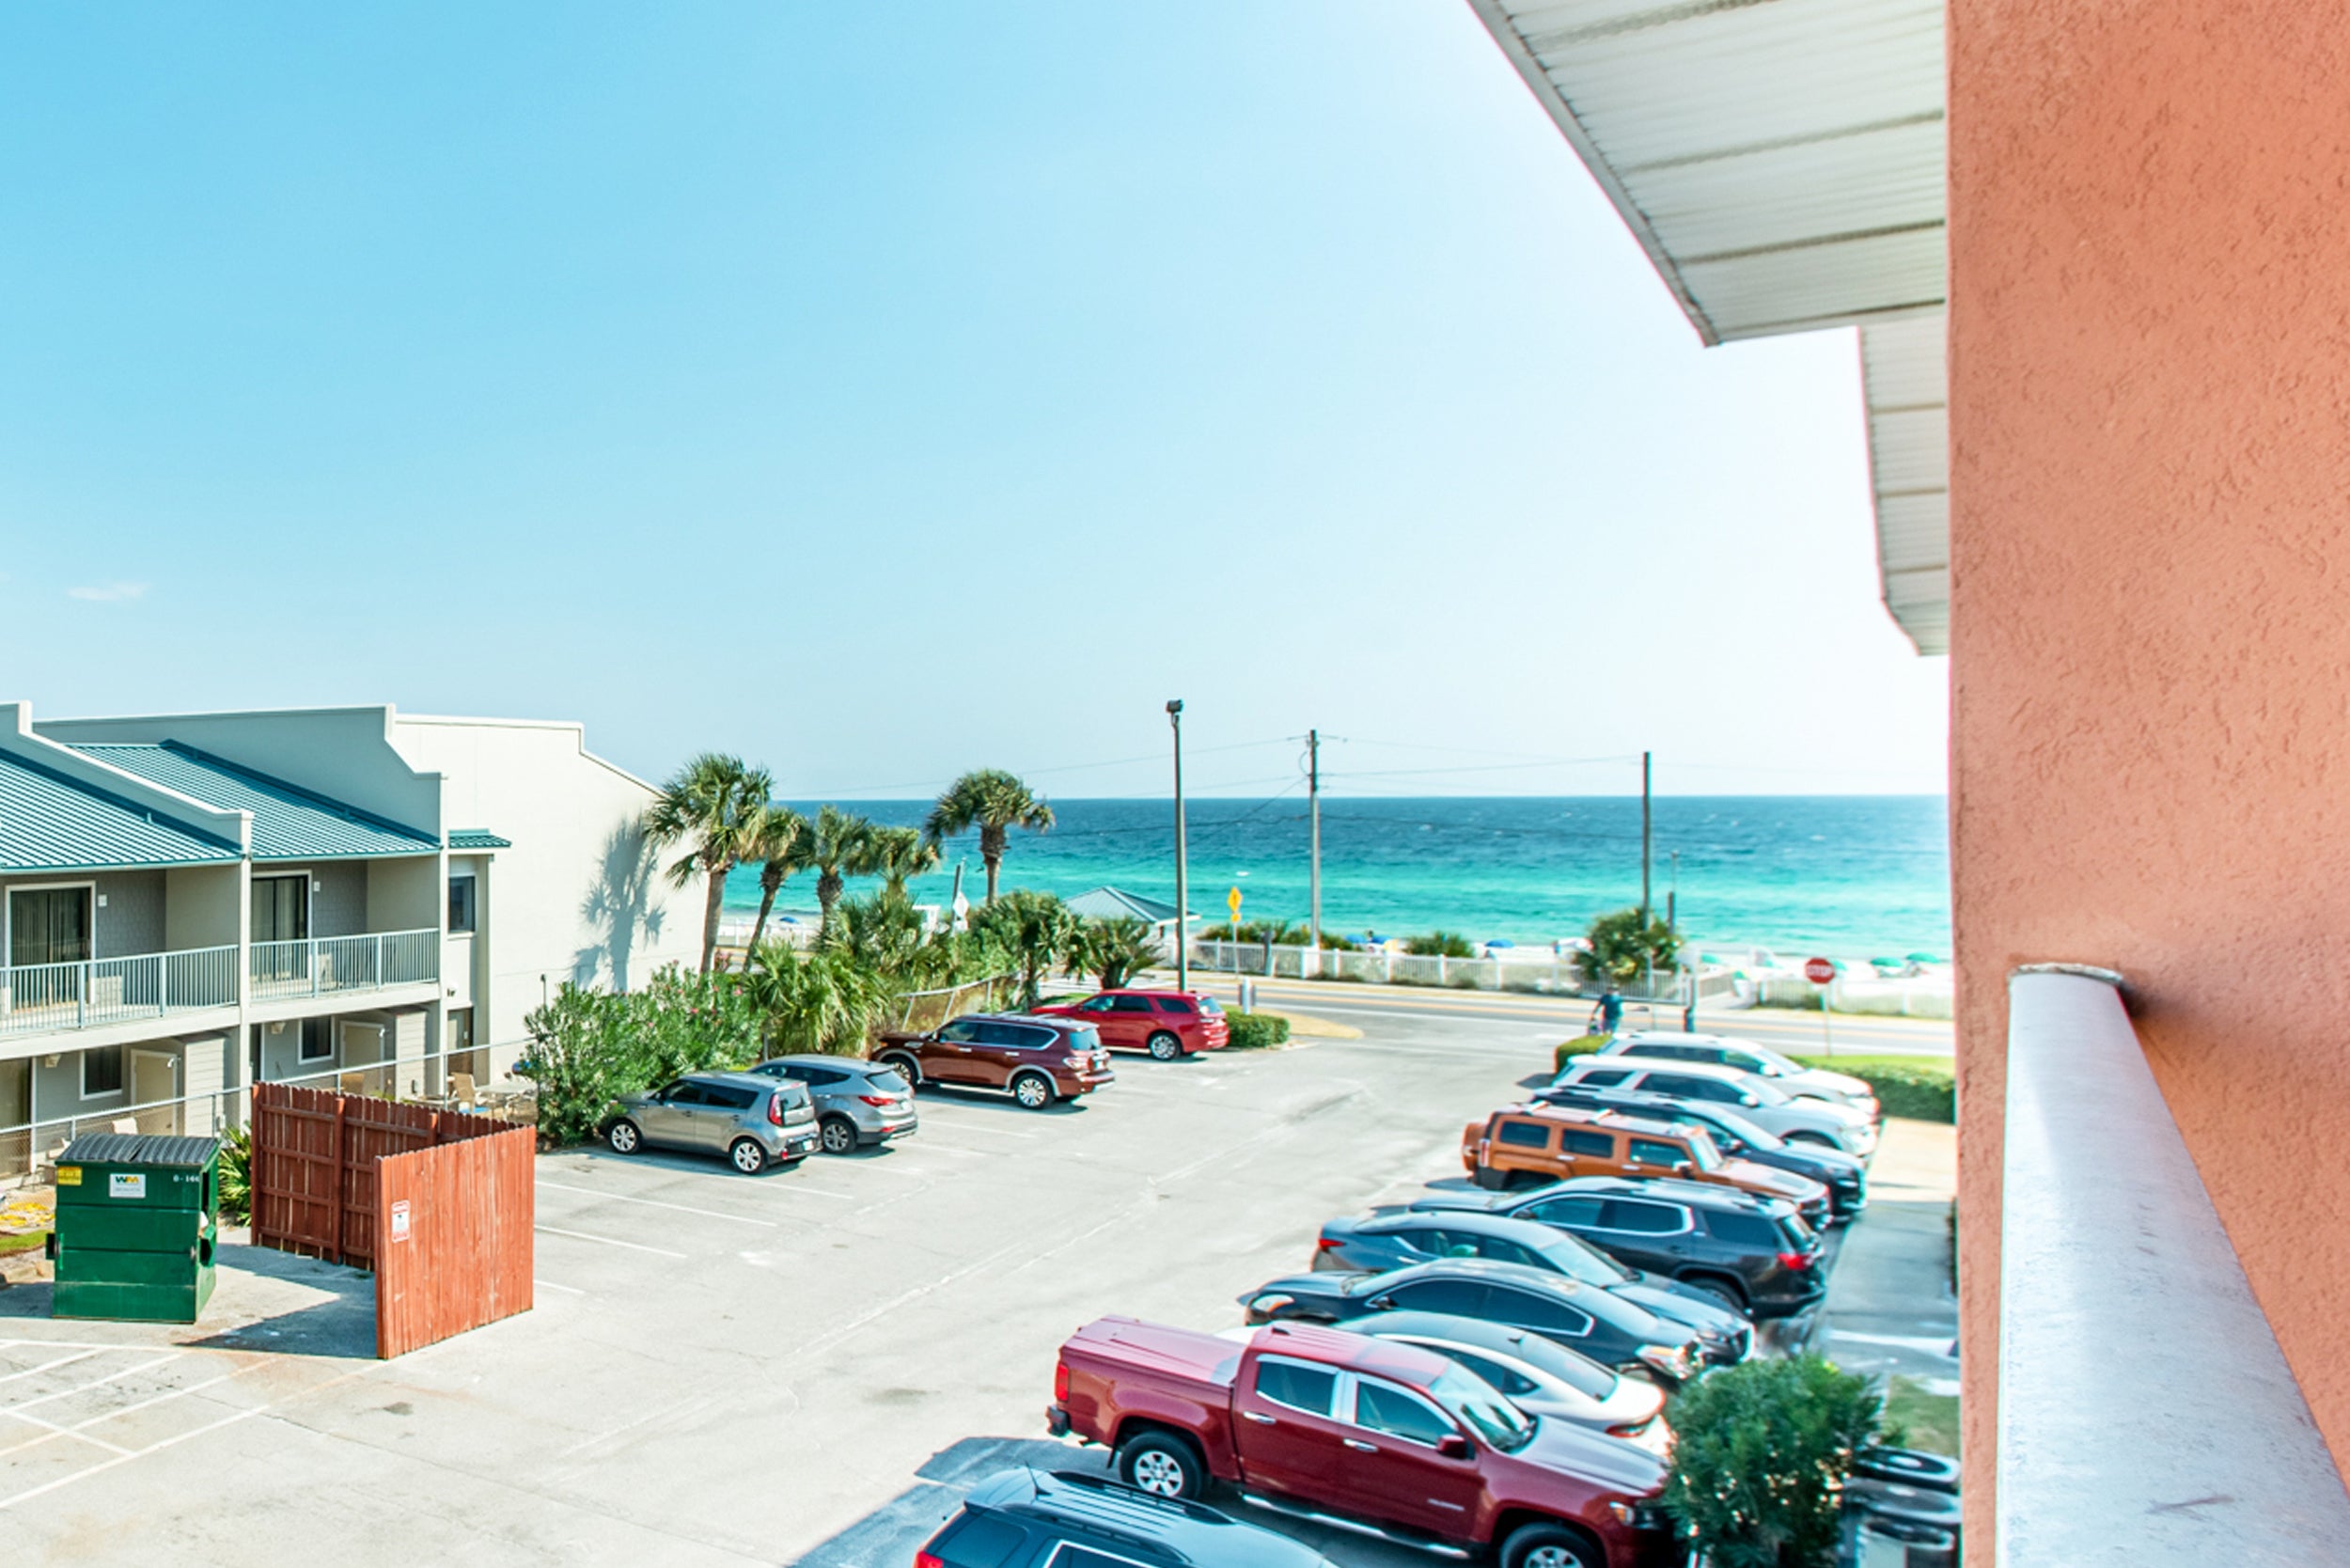 Gorgeous views from Gulf View 306 balcony!